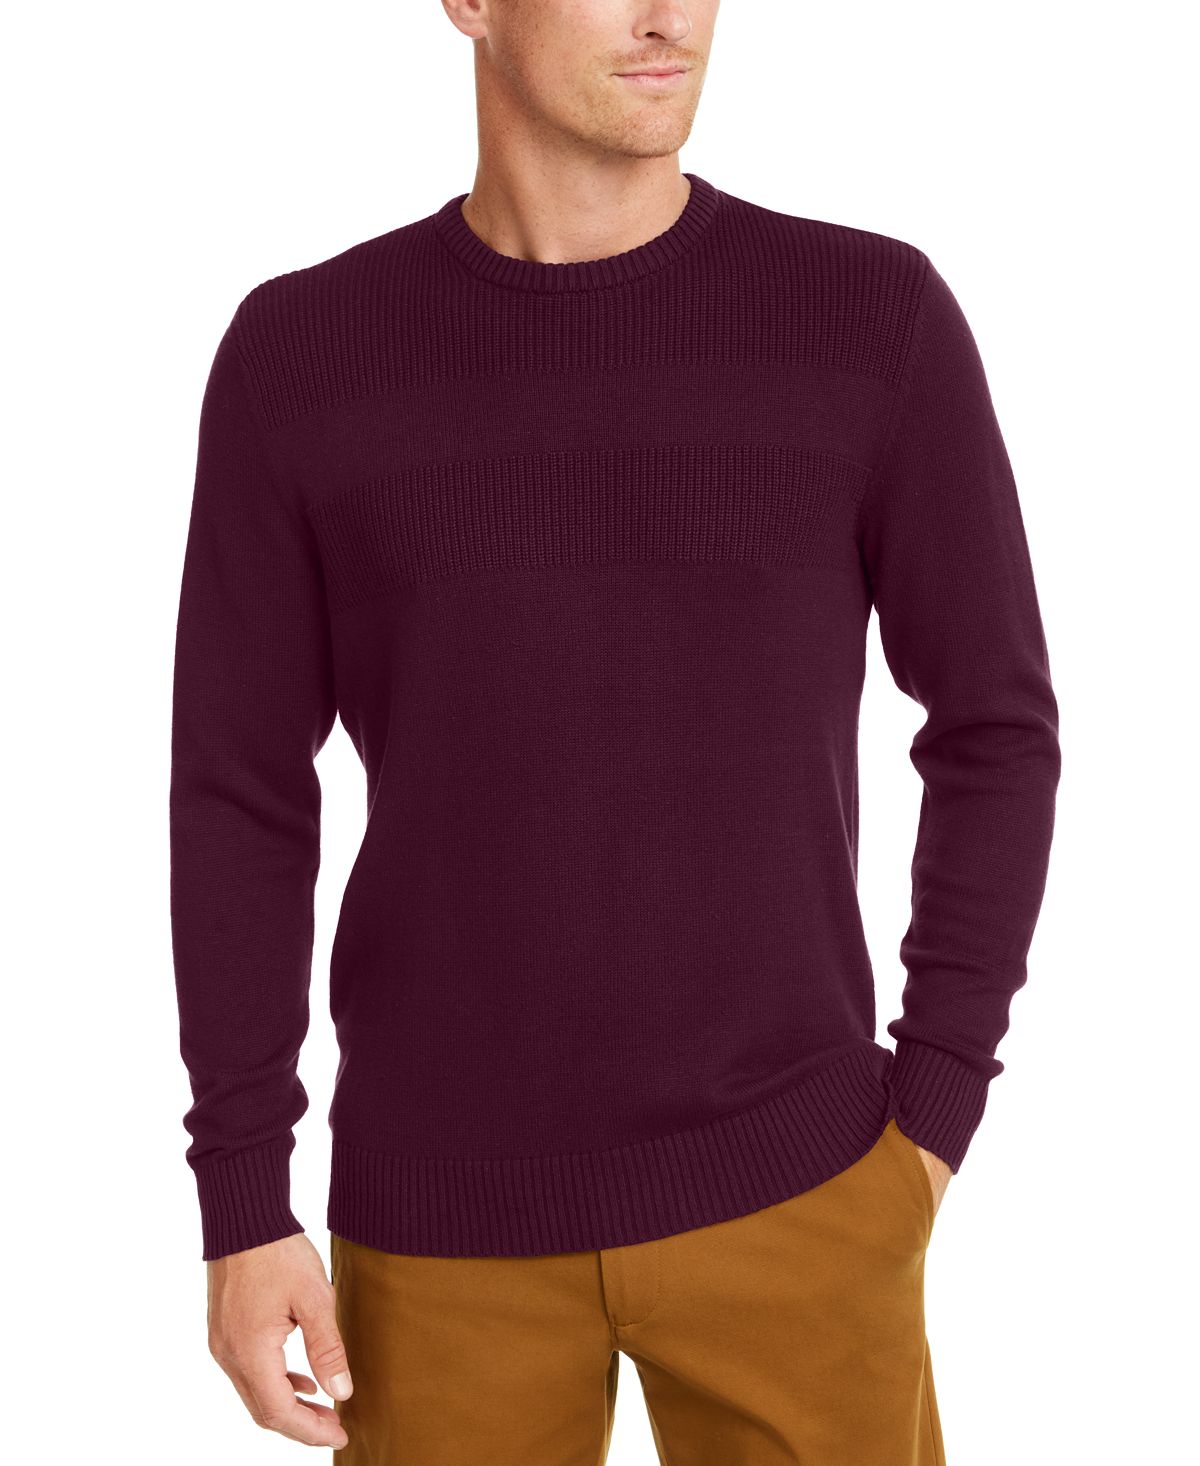 Club Room Cotton Solid Textured Crew Neck Sweater Red Plum